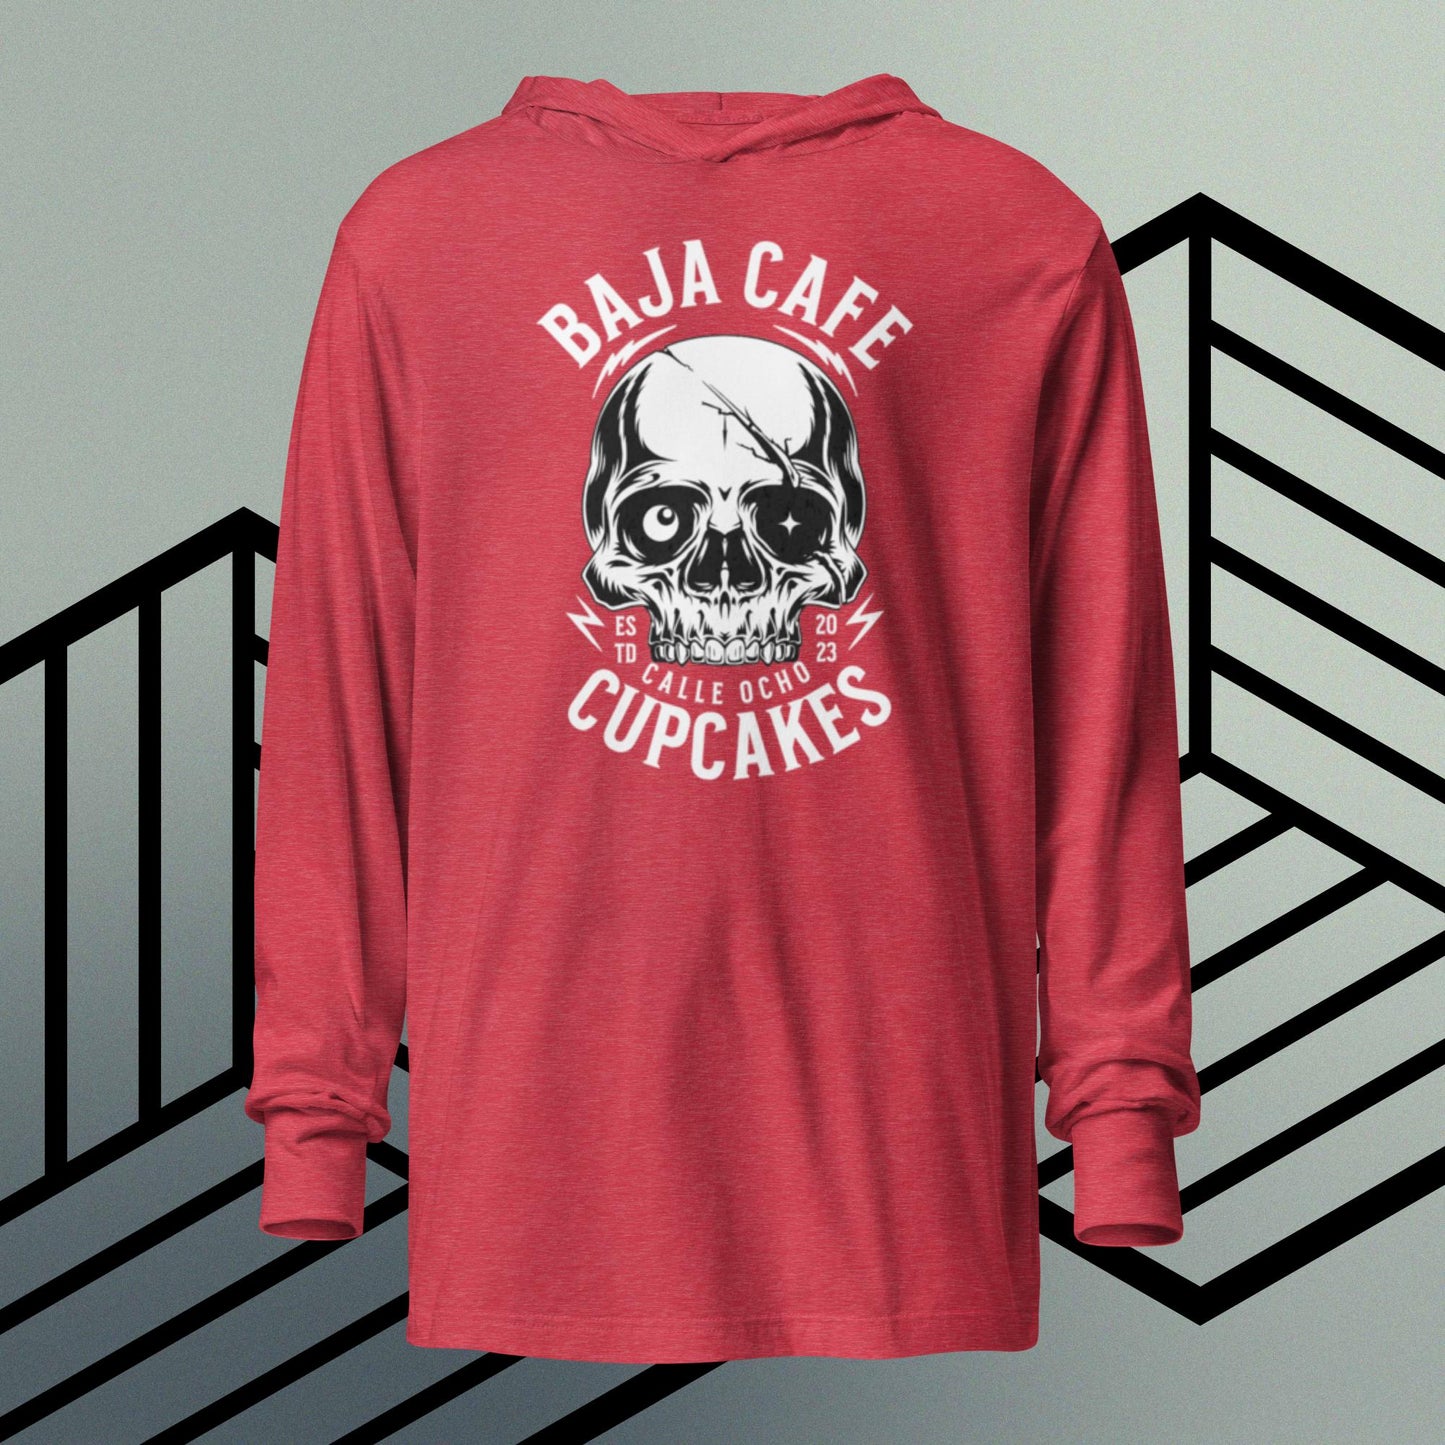 Baja Cafe cupcakes hooded T